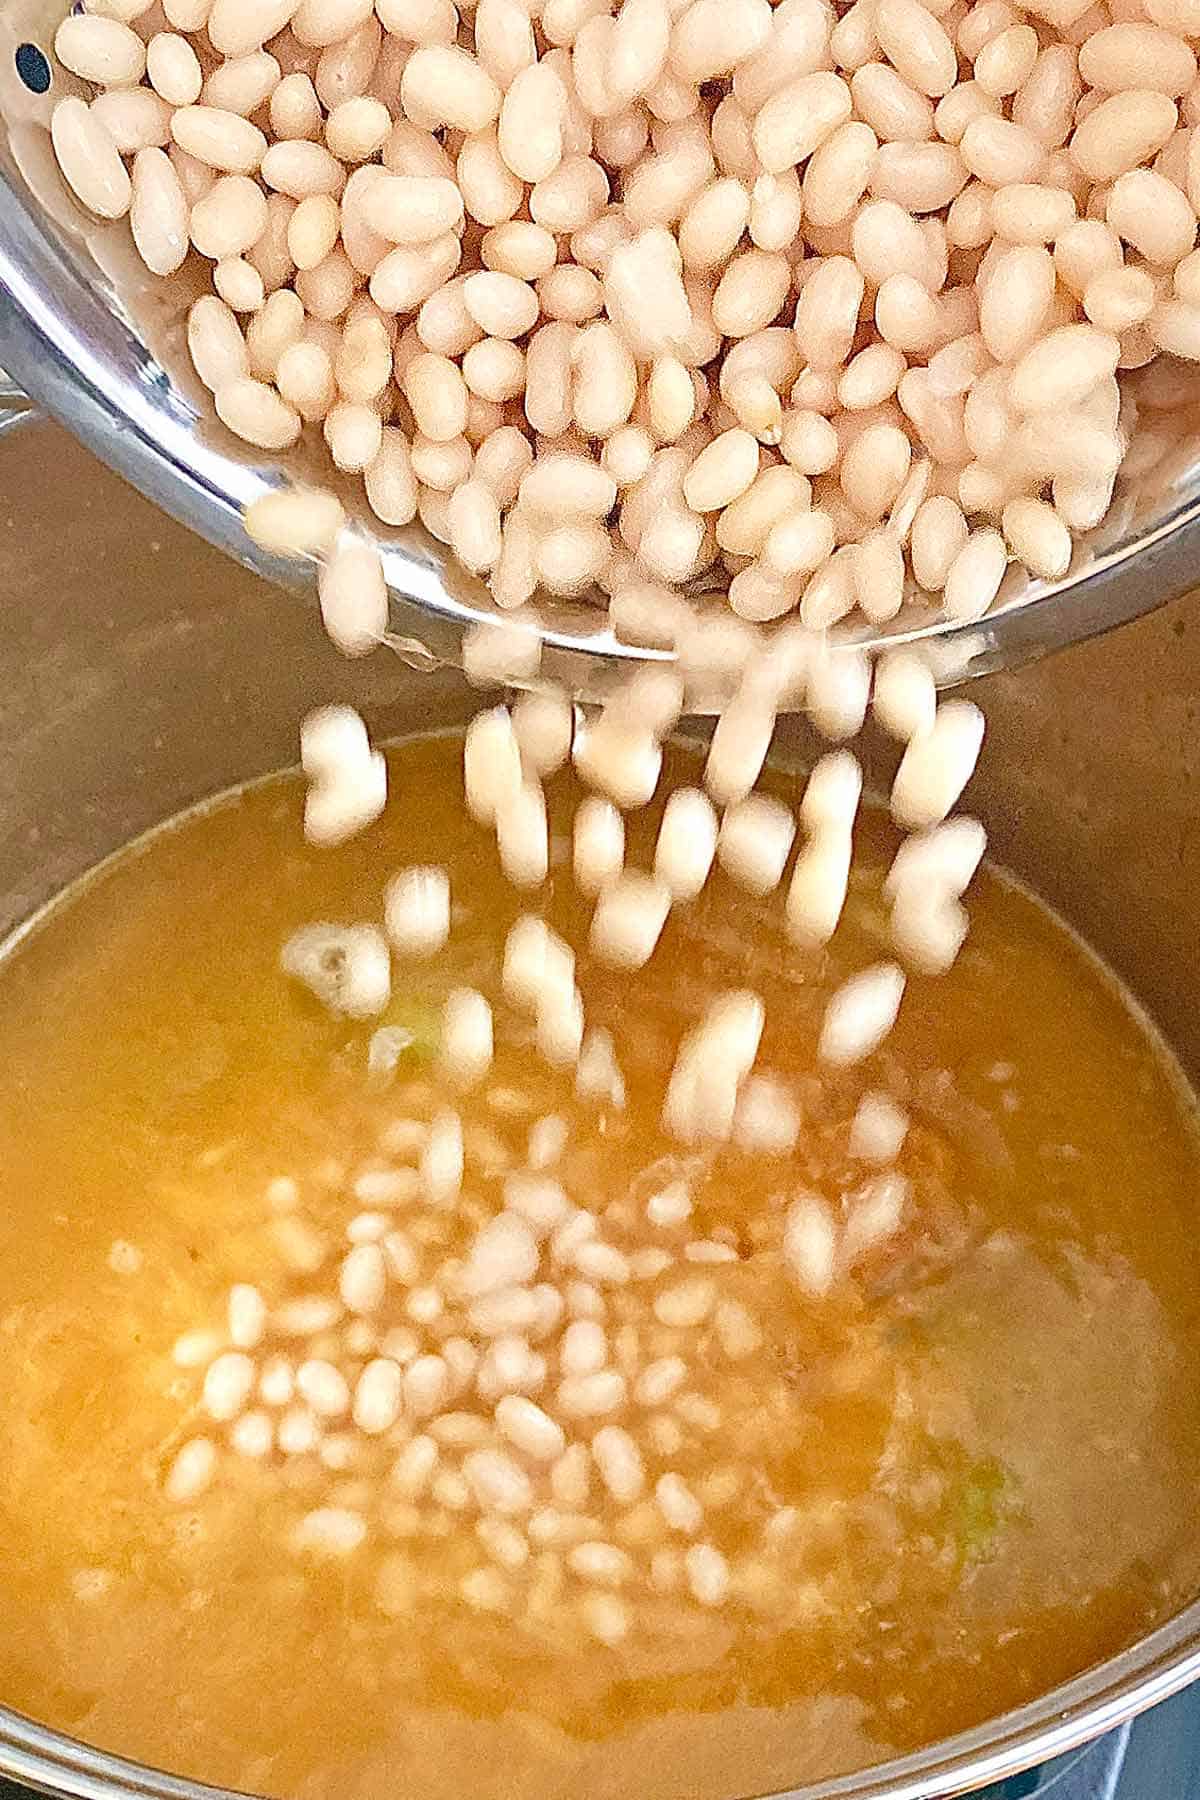 Pouring soaked navy beans into the soup stock in a pot.